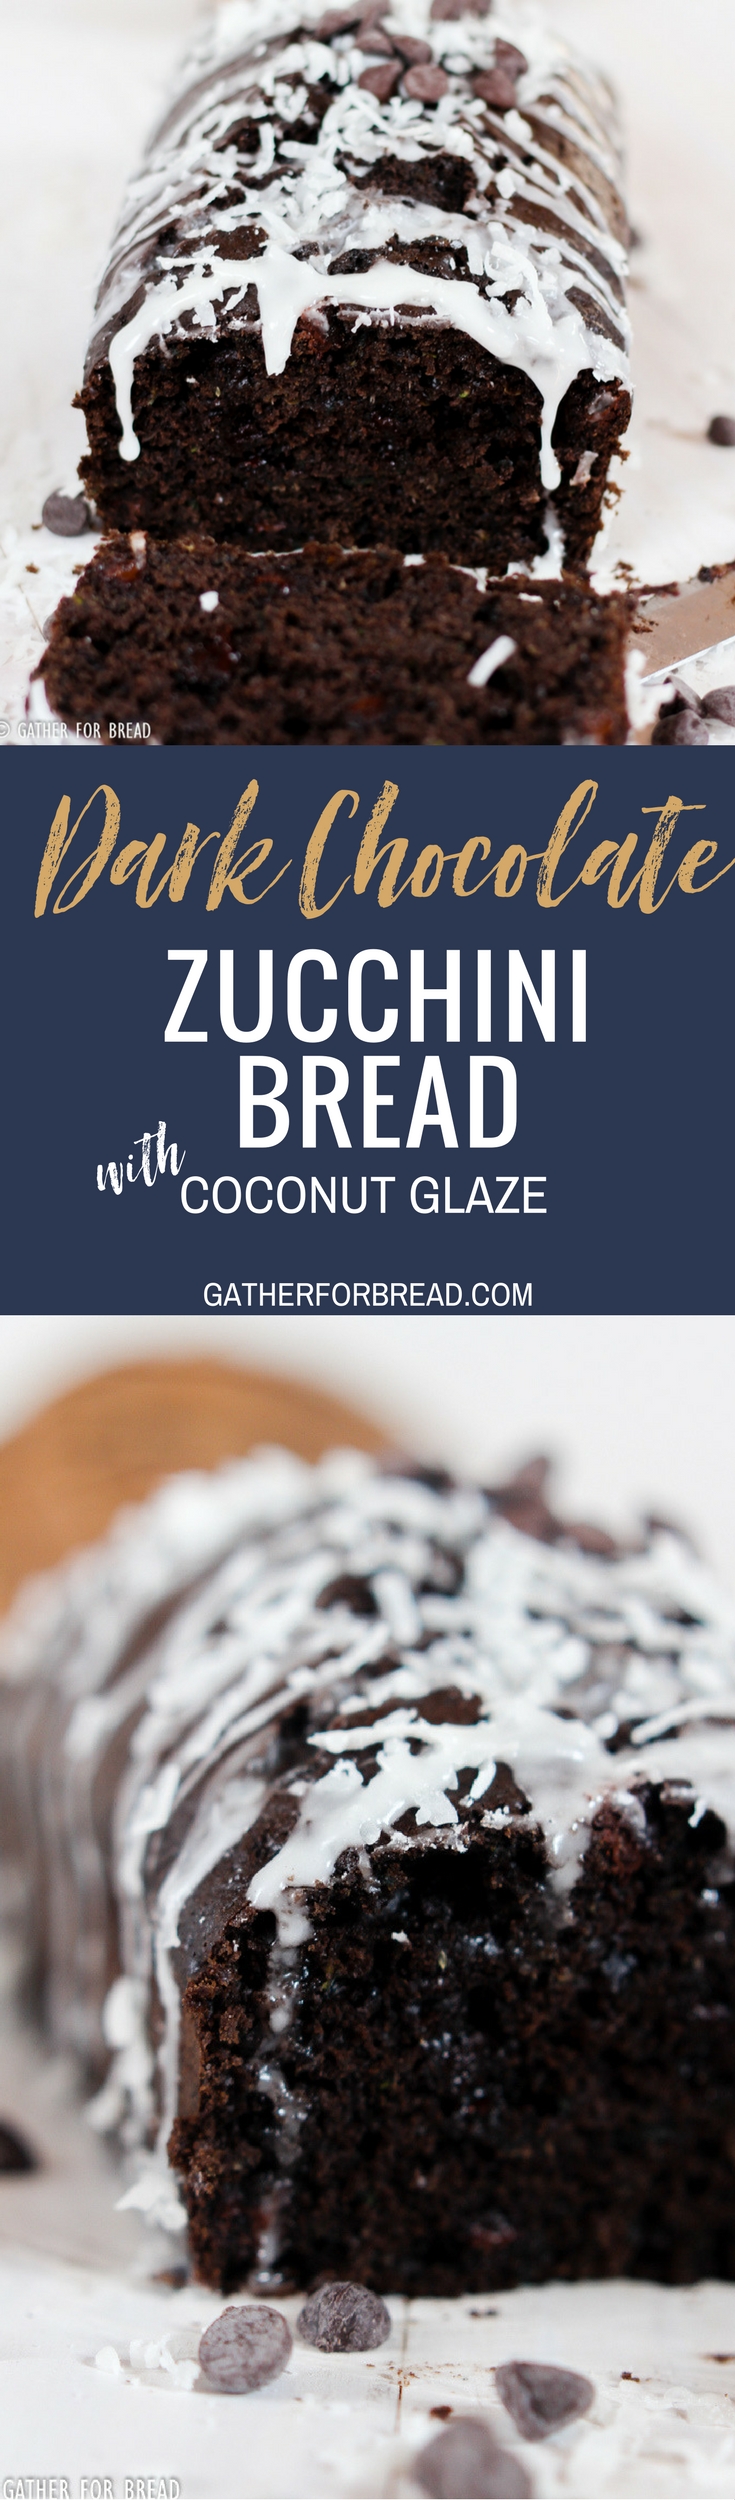 Dark Chocolate Zucchini Bread with Coconut Glaze - Recipe for moist chocolate zucchini quick bread topped with a coconut glaze. The recipe makes a sweet homemade loaf that's perfect for summer.